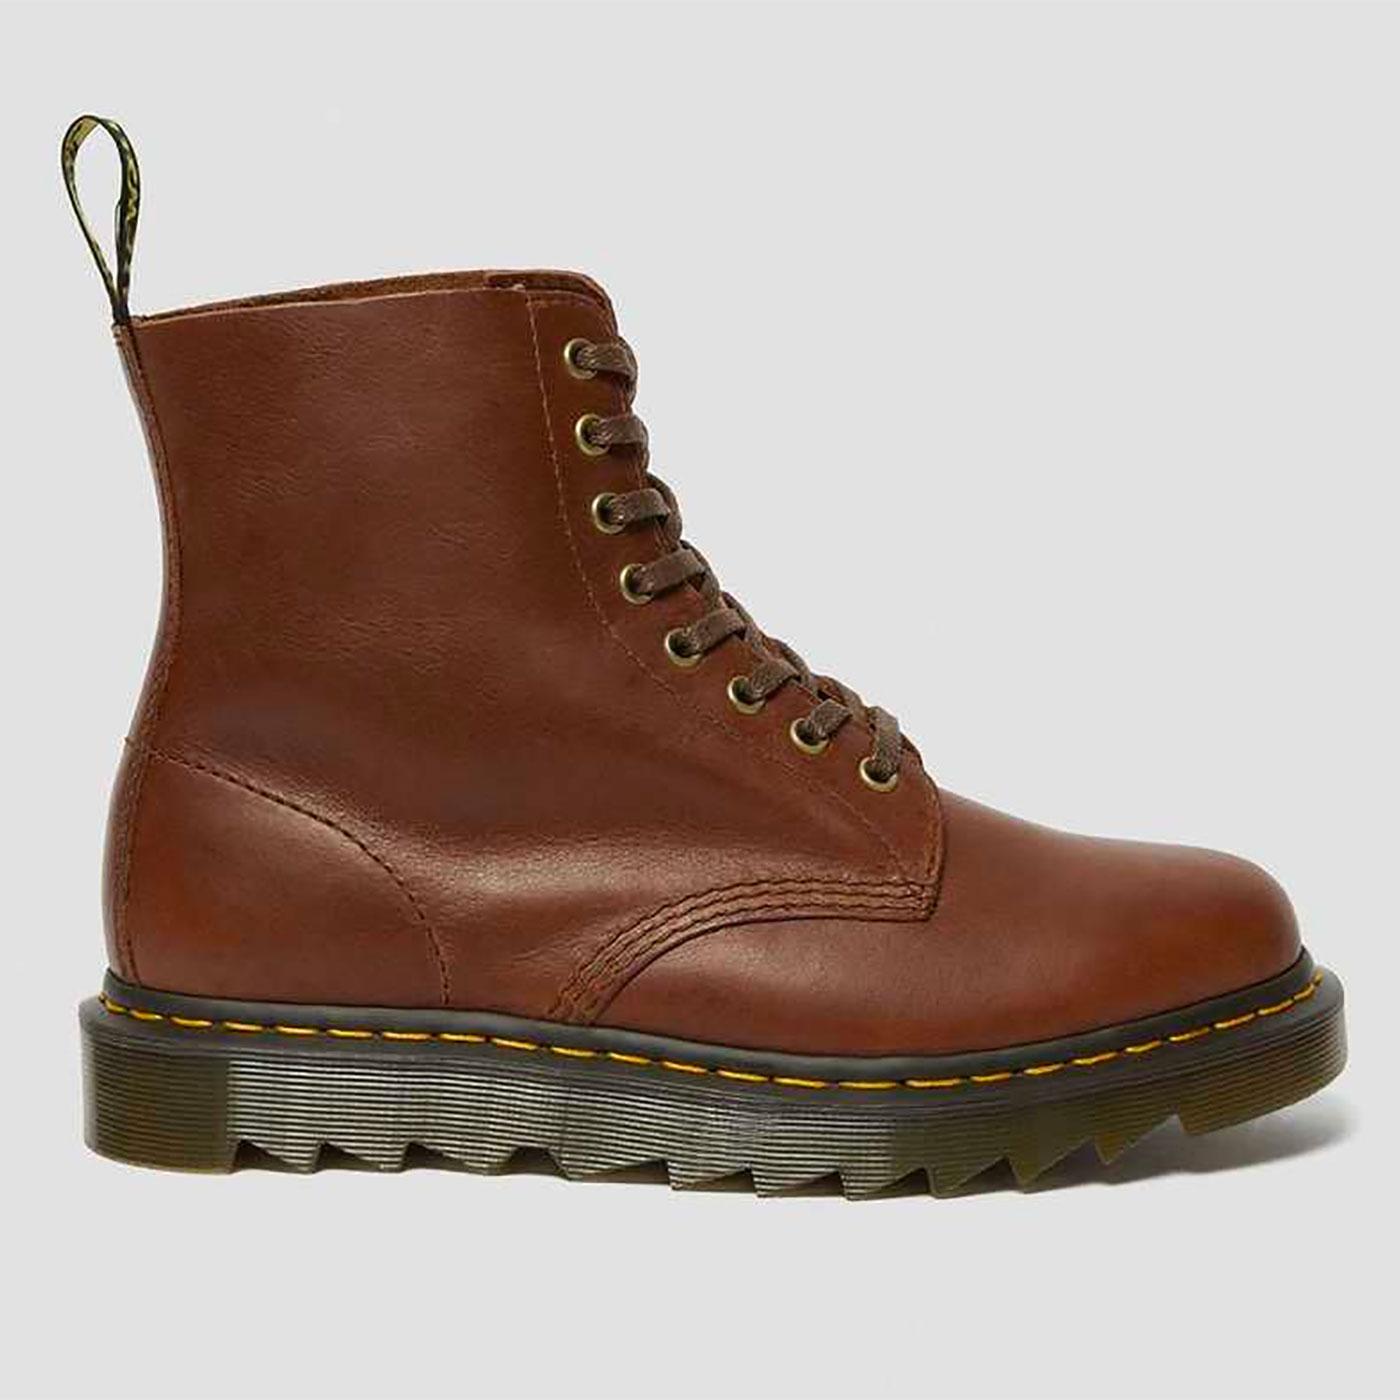 DR MARTENS 1460 Pascal Ziggy 8 Eyelet Boots in Tan Luxor